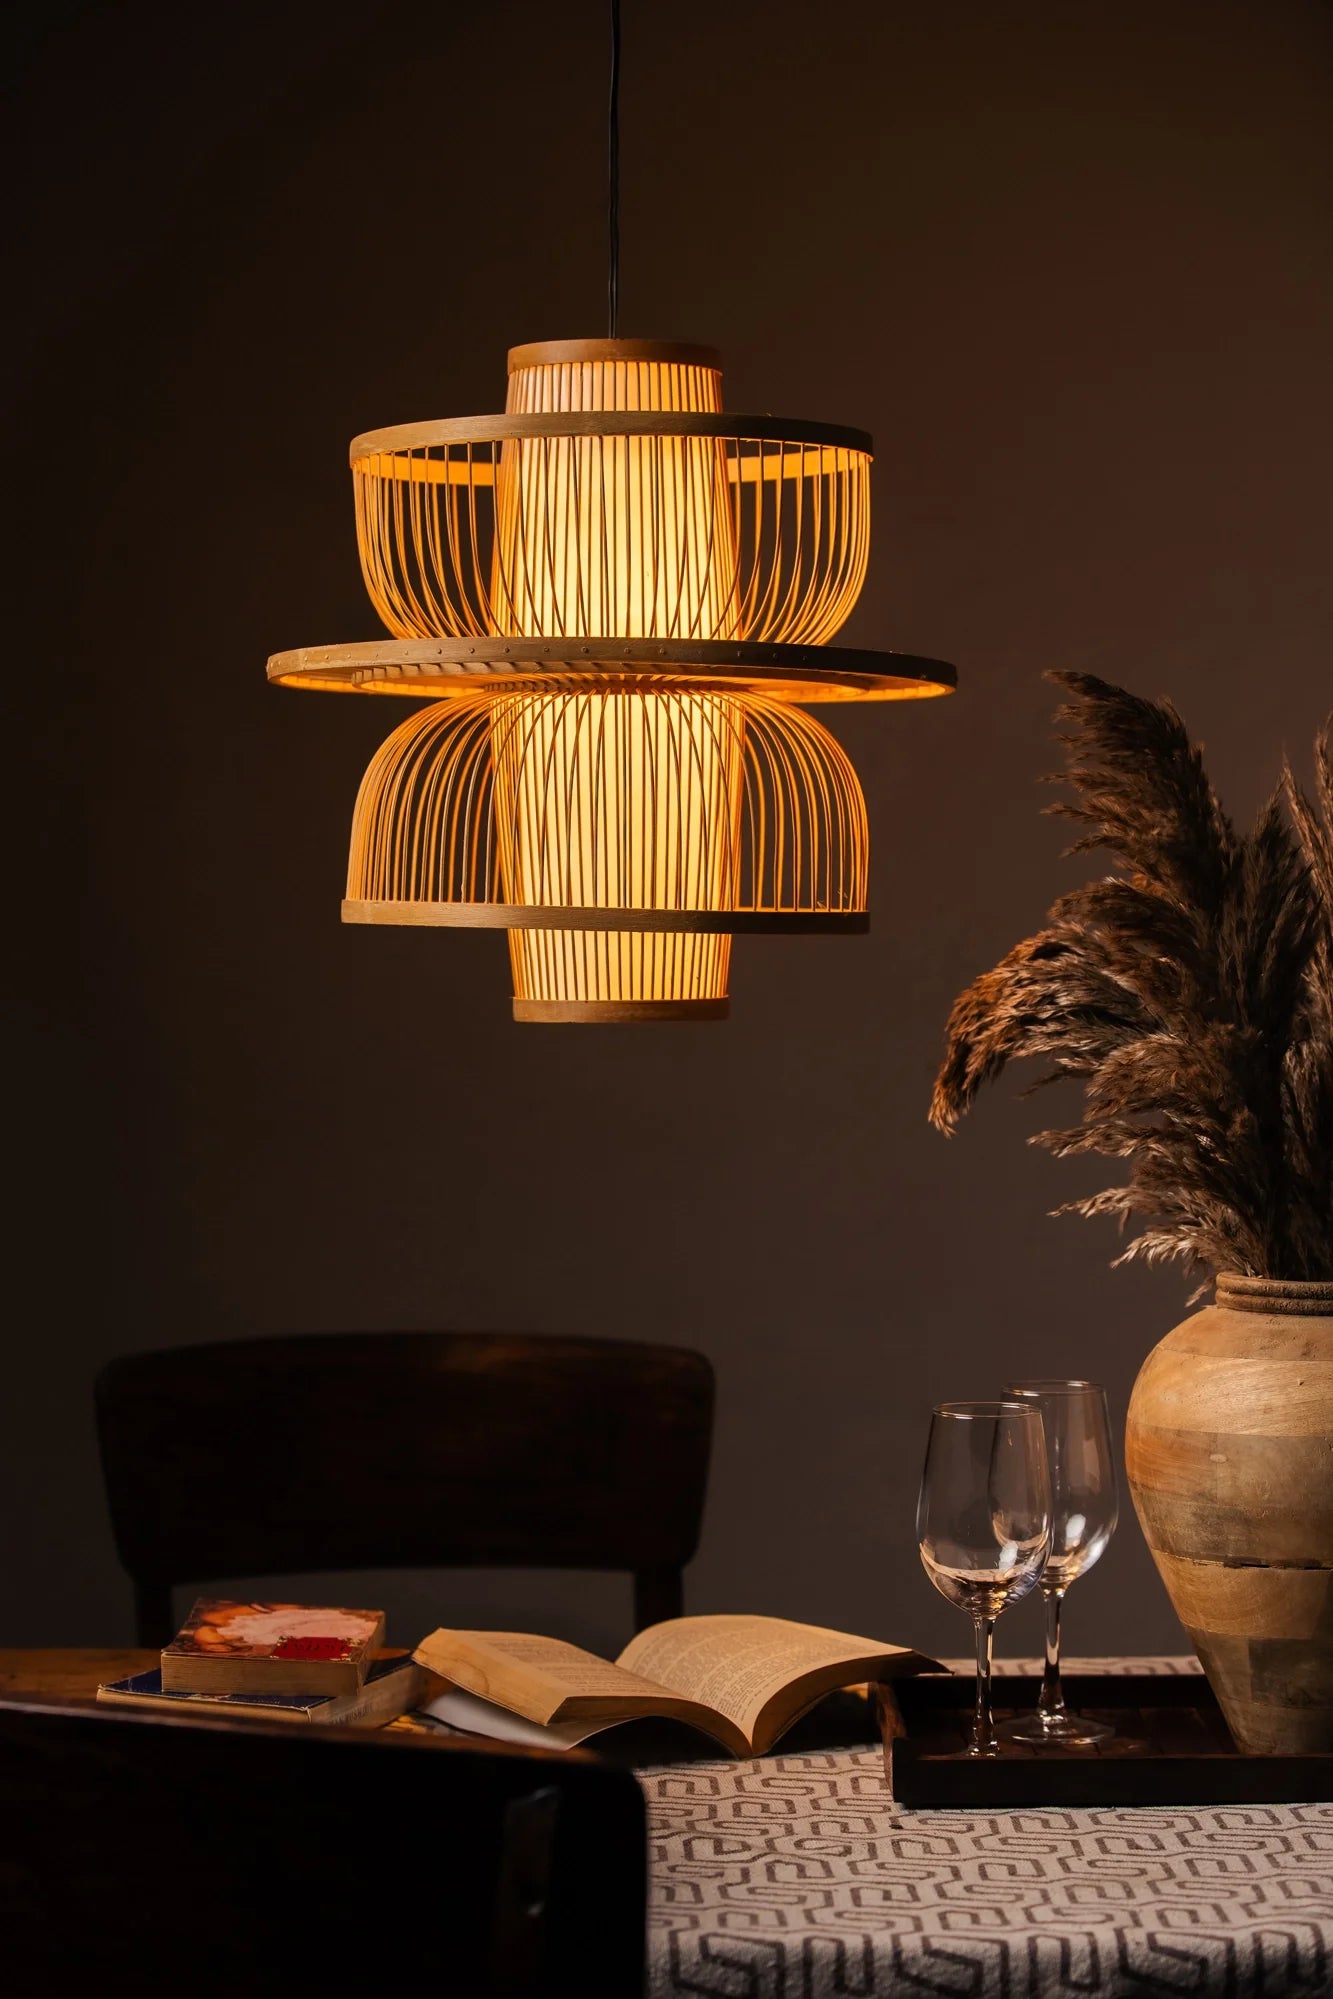 Fountain Bamboo Lampshade with light diffuser